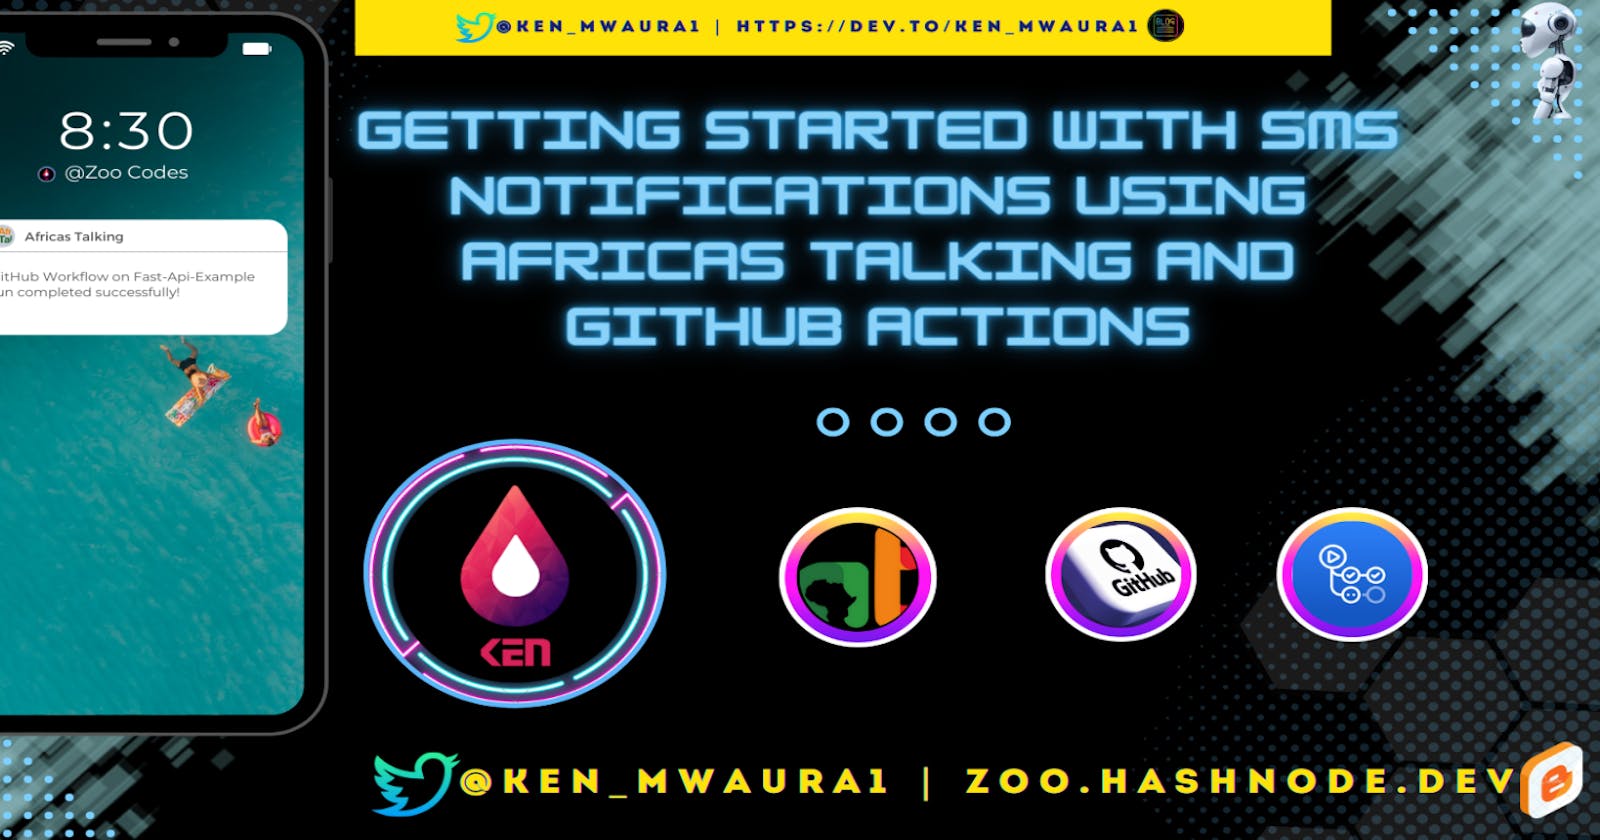 Getting Started with SMS Notifications using Africas Talking and GitHub Actions